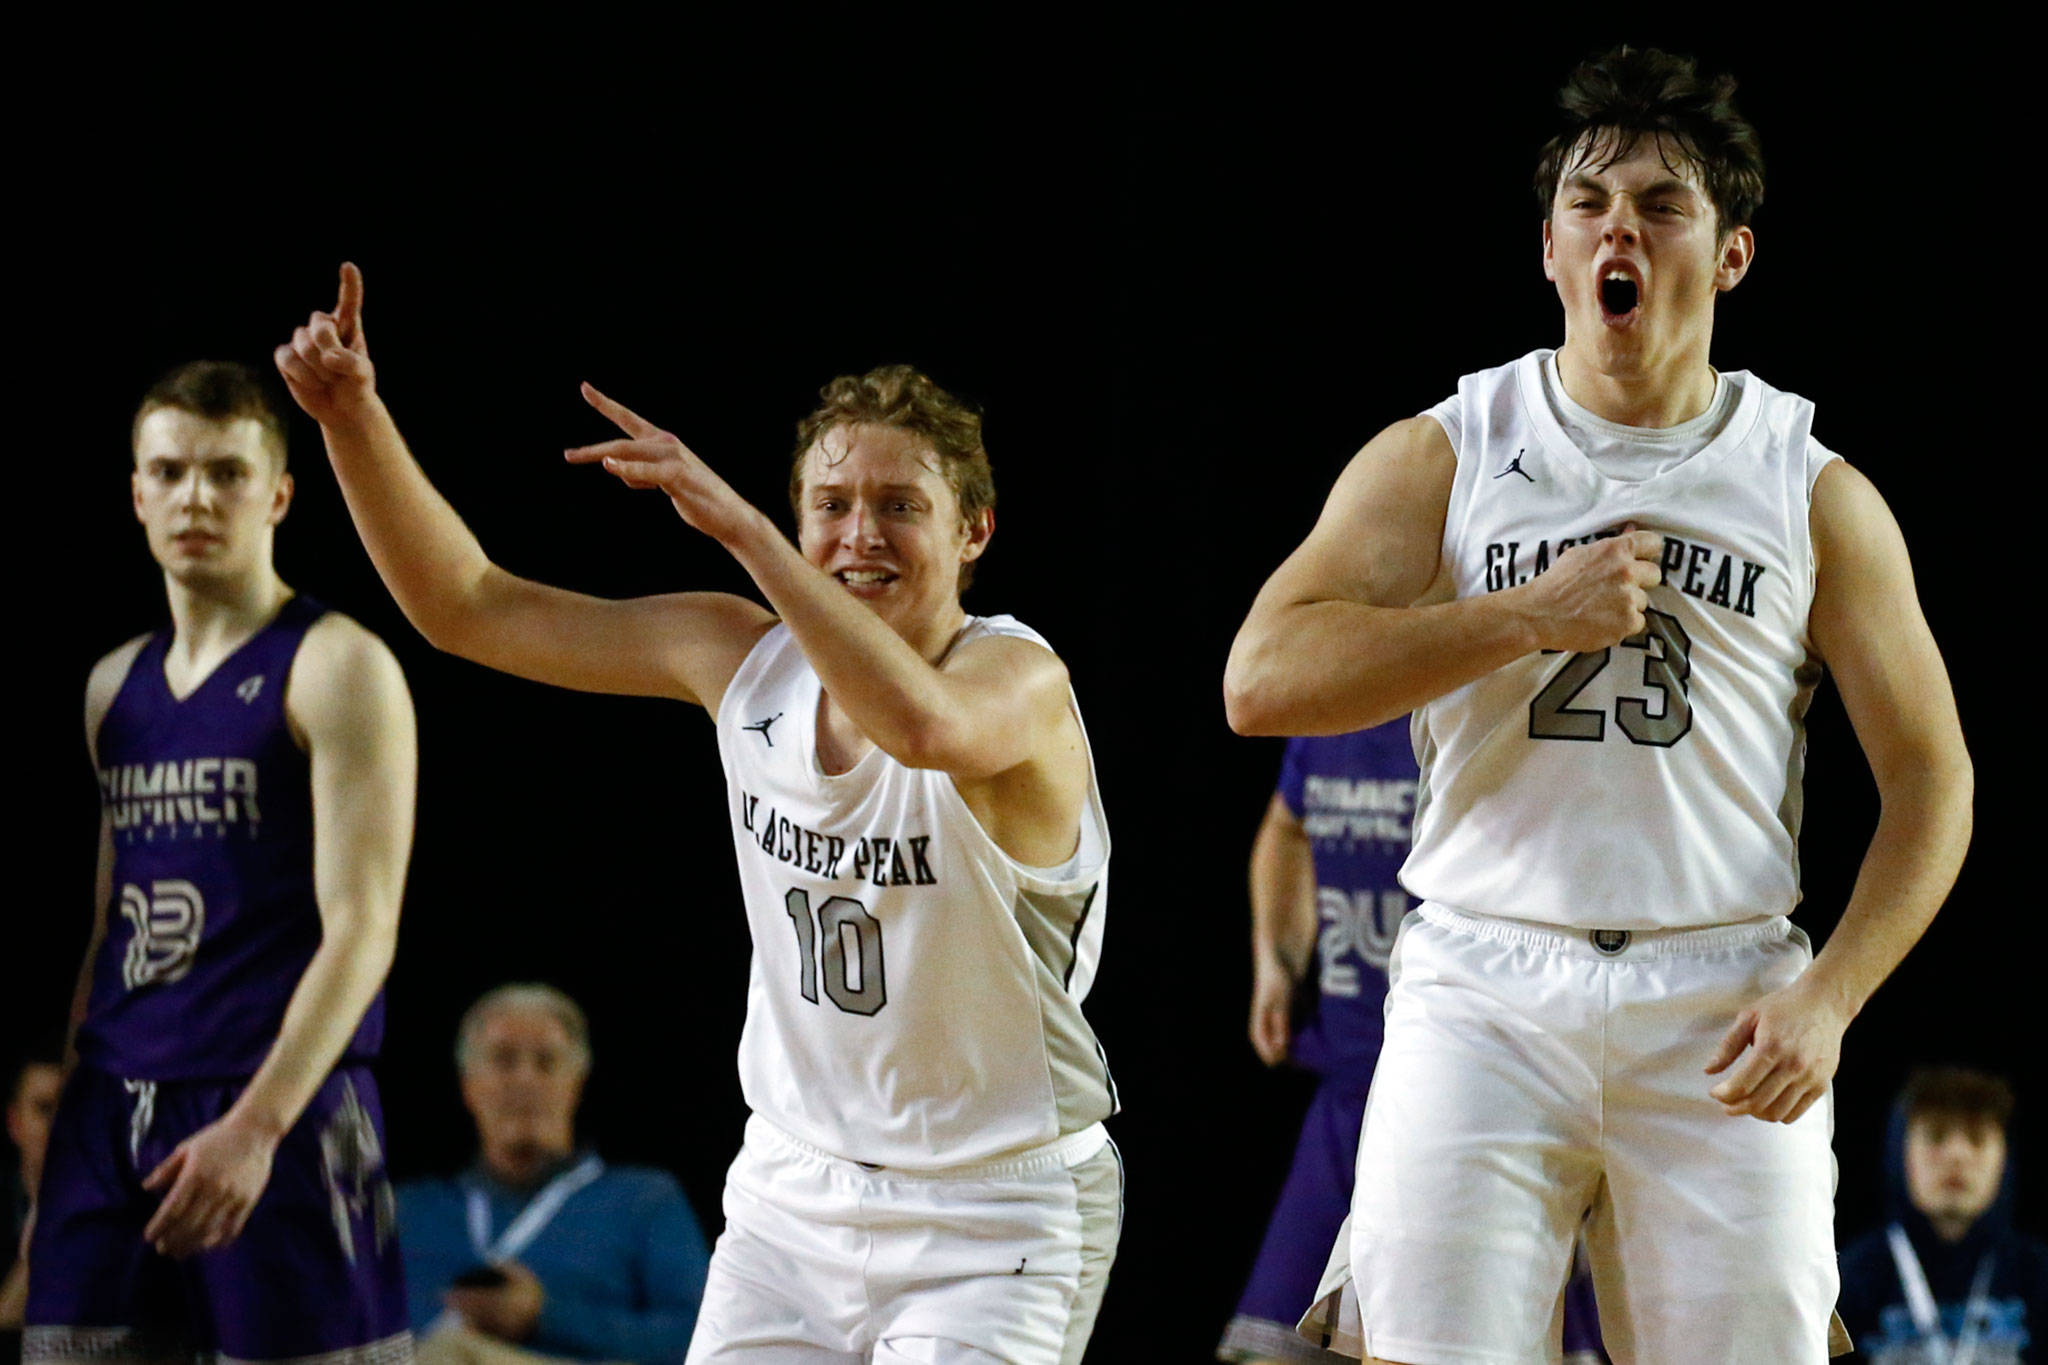 Glacier Peak defeated Sumner, 57-52, to advance to the semifinalsThursday evening at the Tacoma Dome on March 5, 2020. (Kevin Clark / The Herald)